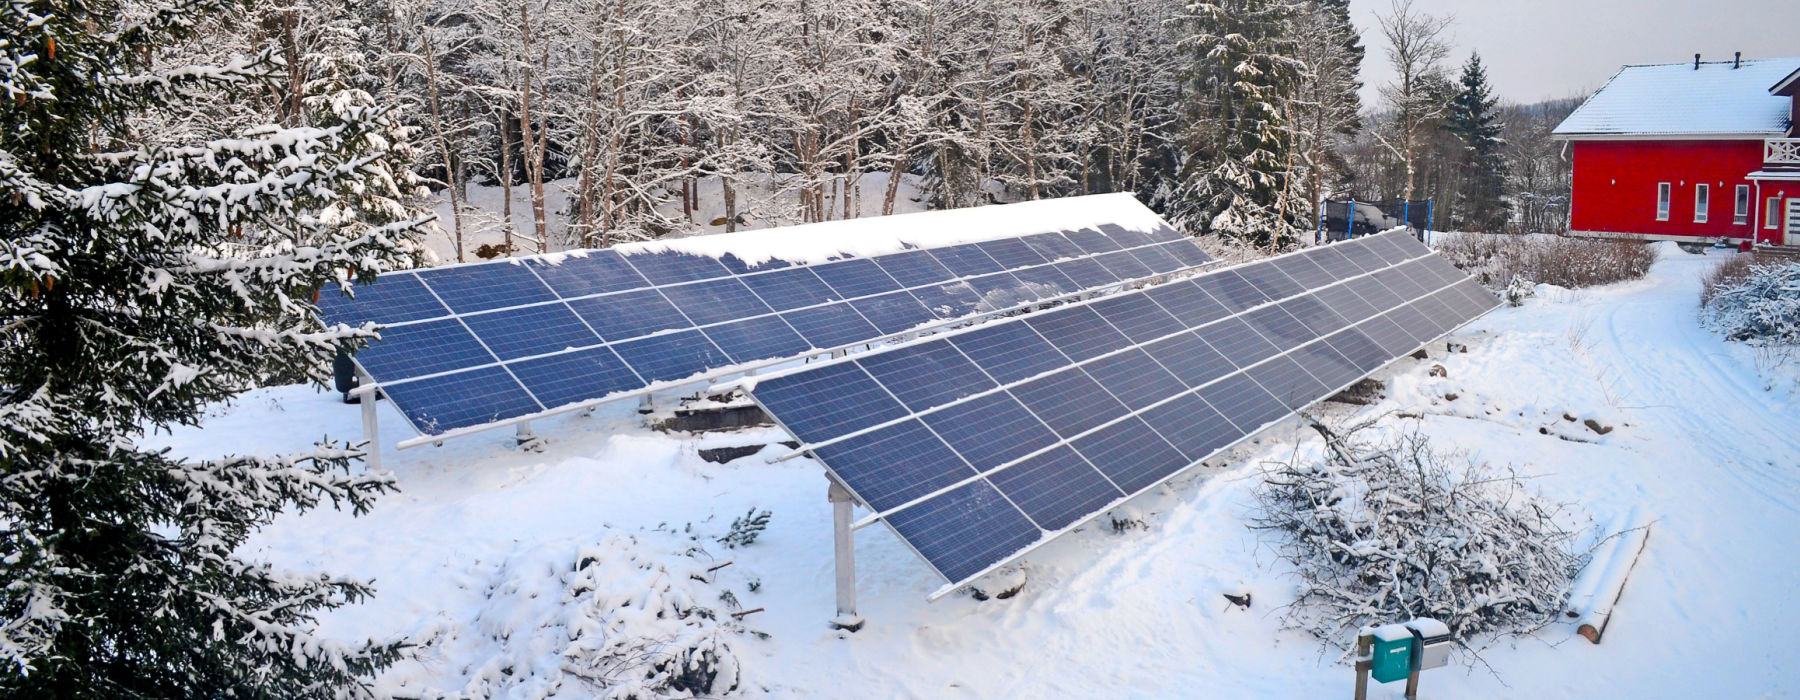 How Does Winter Affect Solar Panel Productivity?